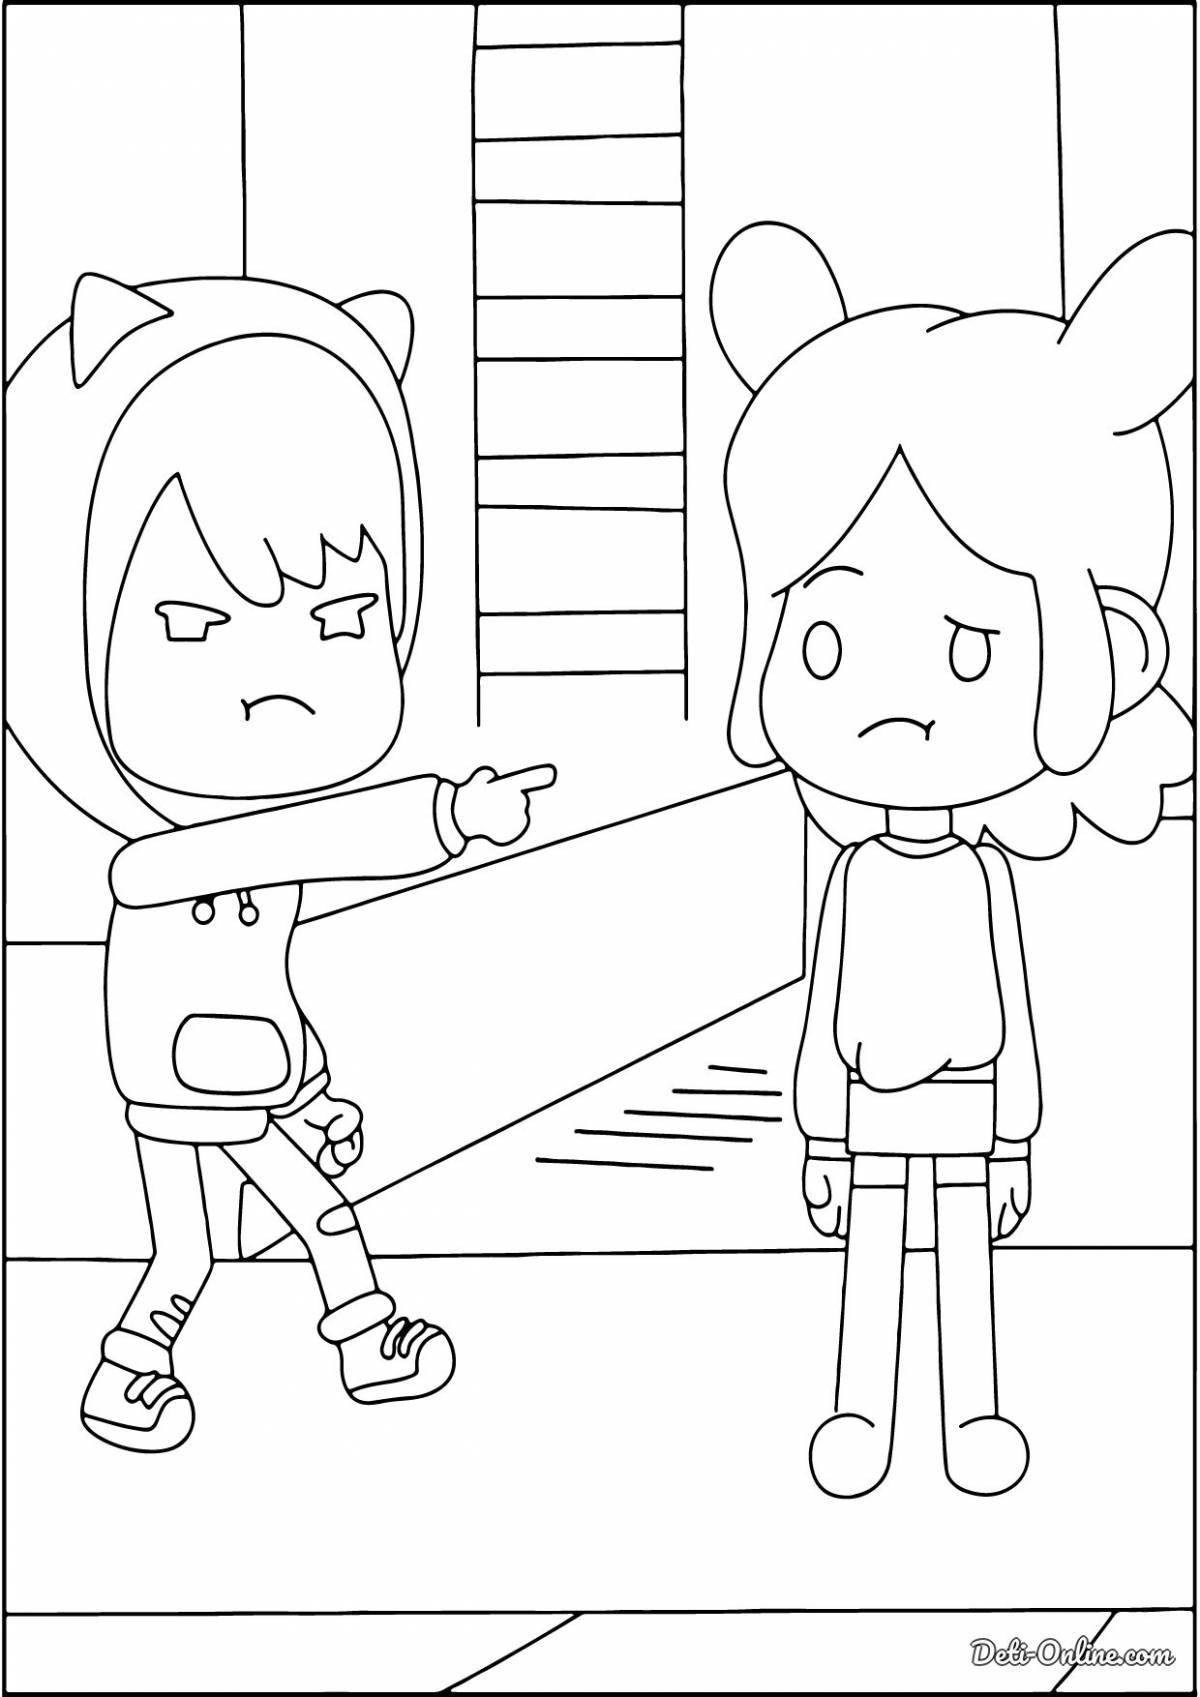 Adorable current life coloring page